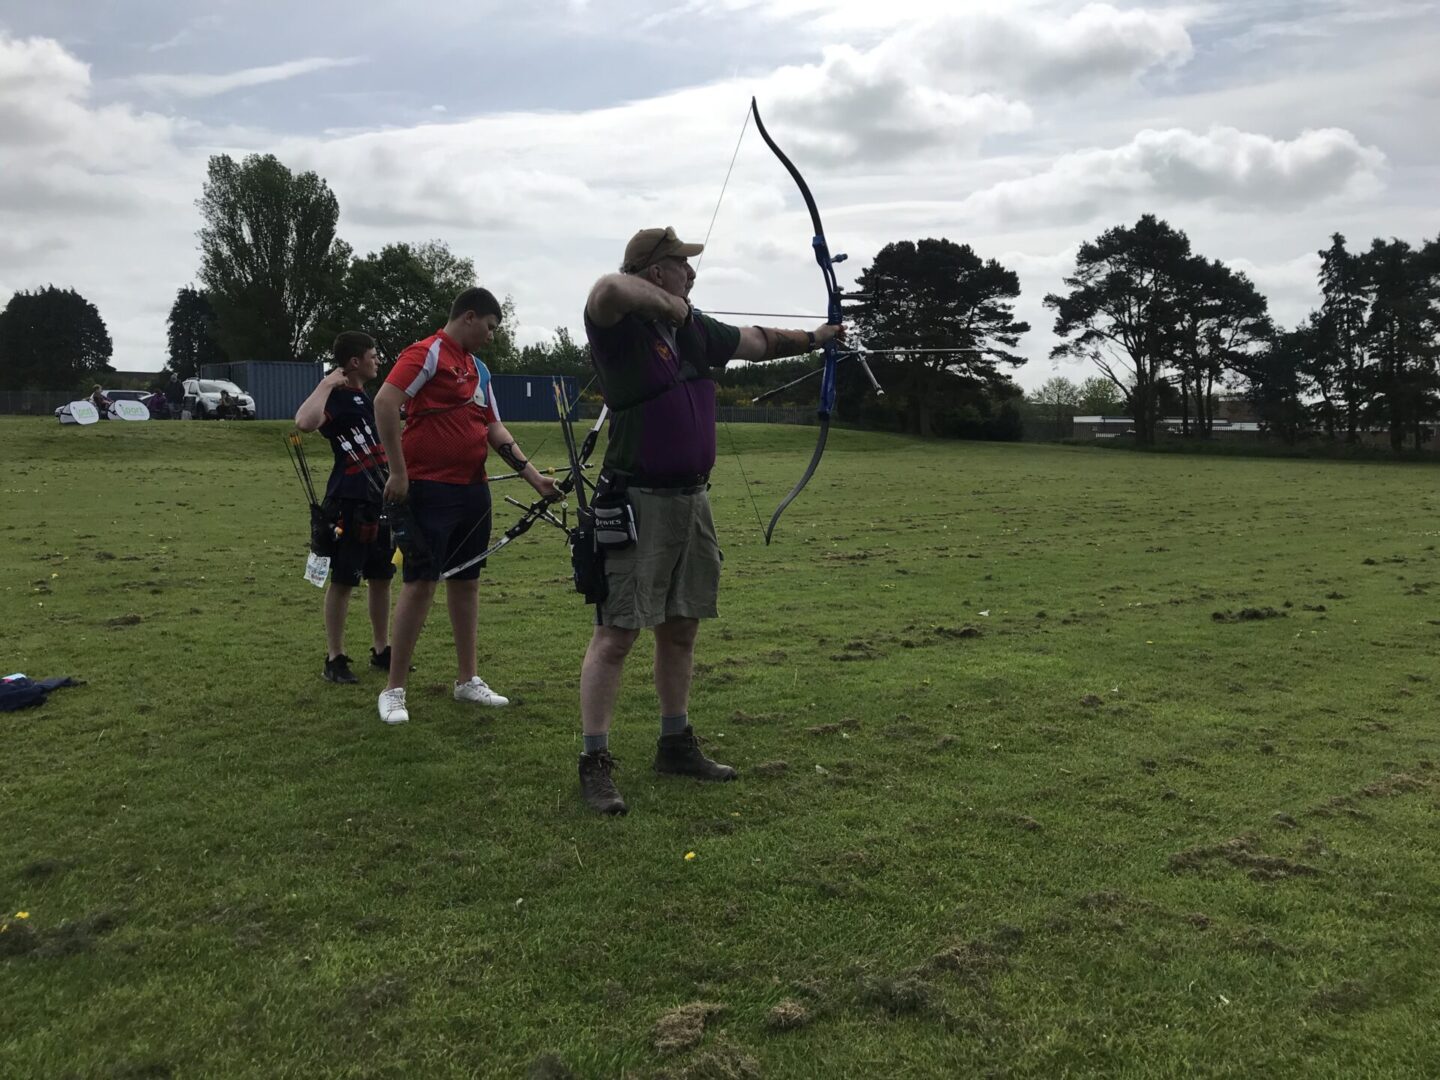 Start Archery Week: Two groups team up to welcome families